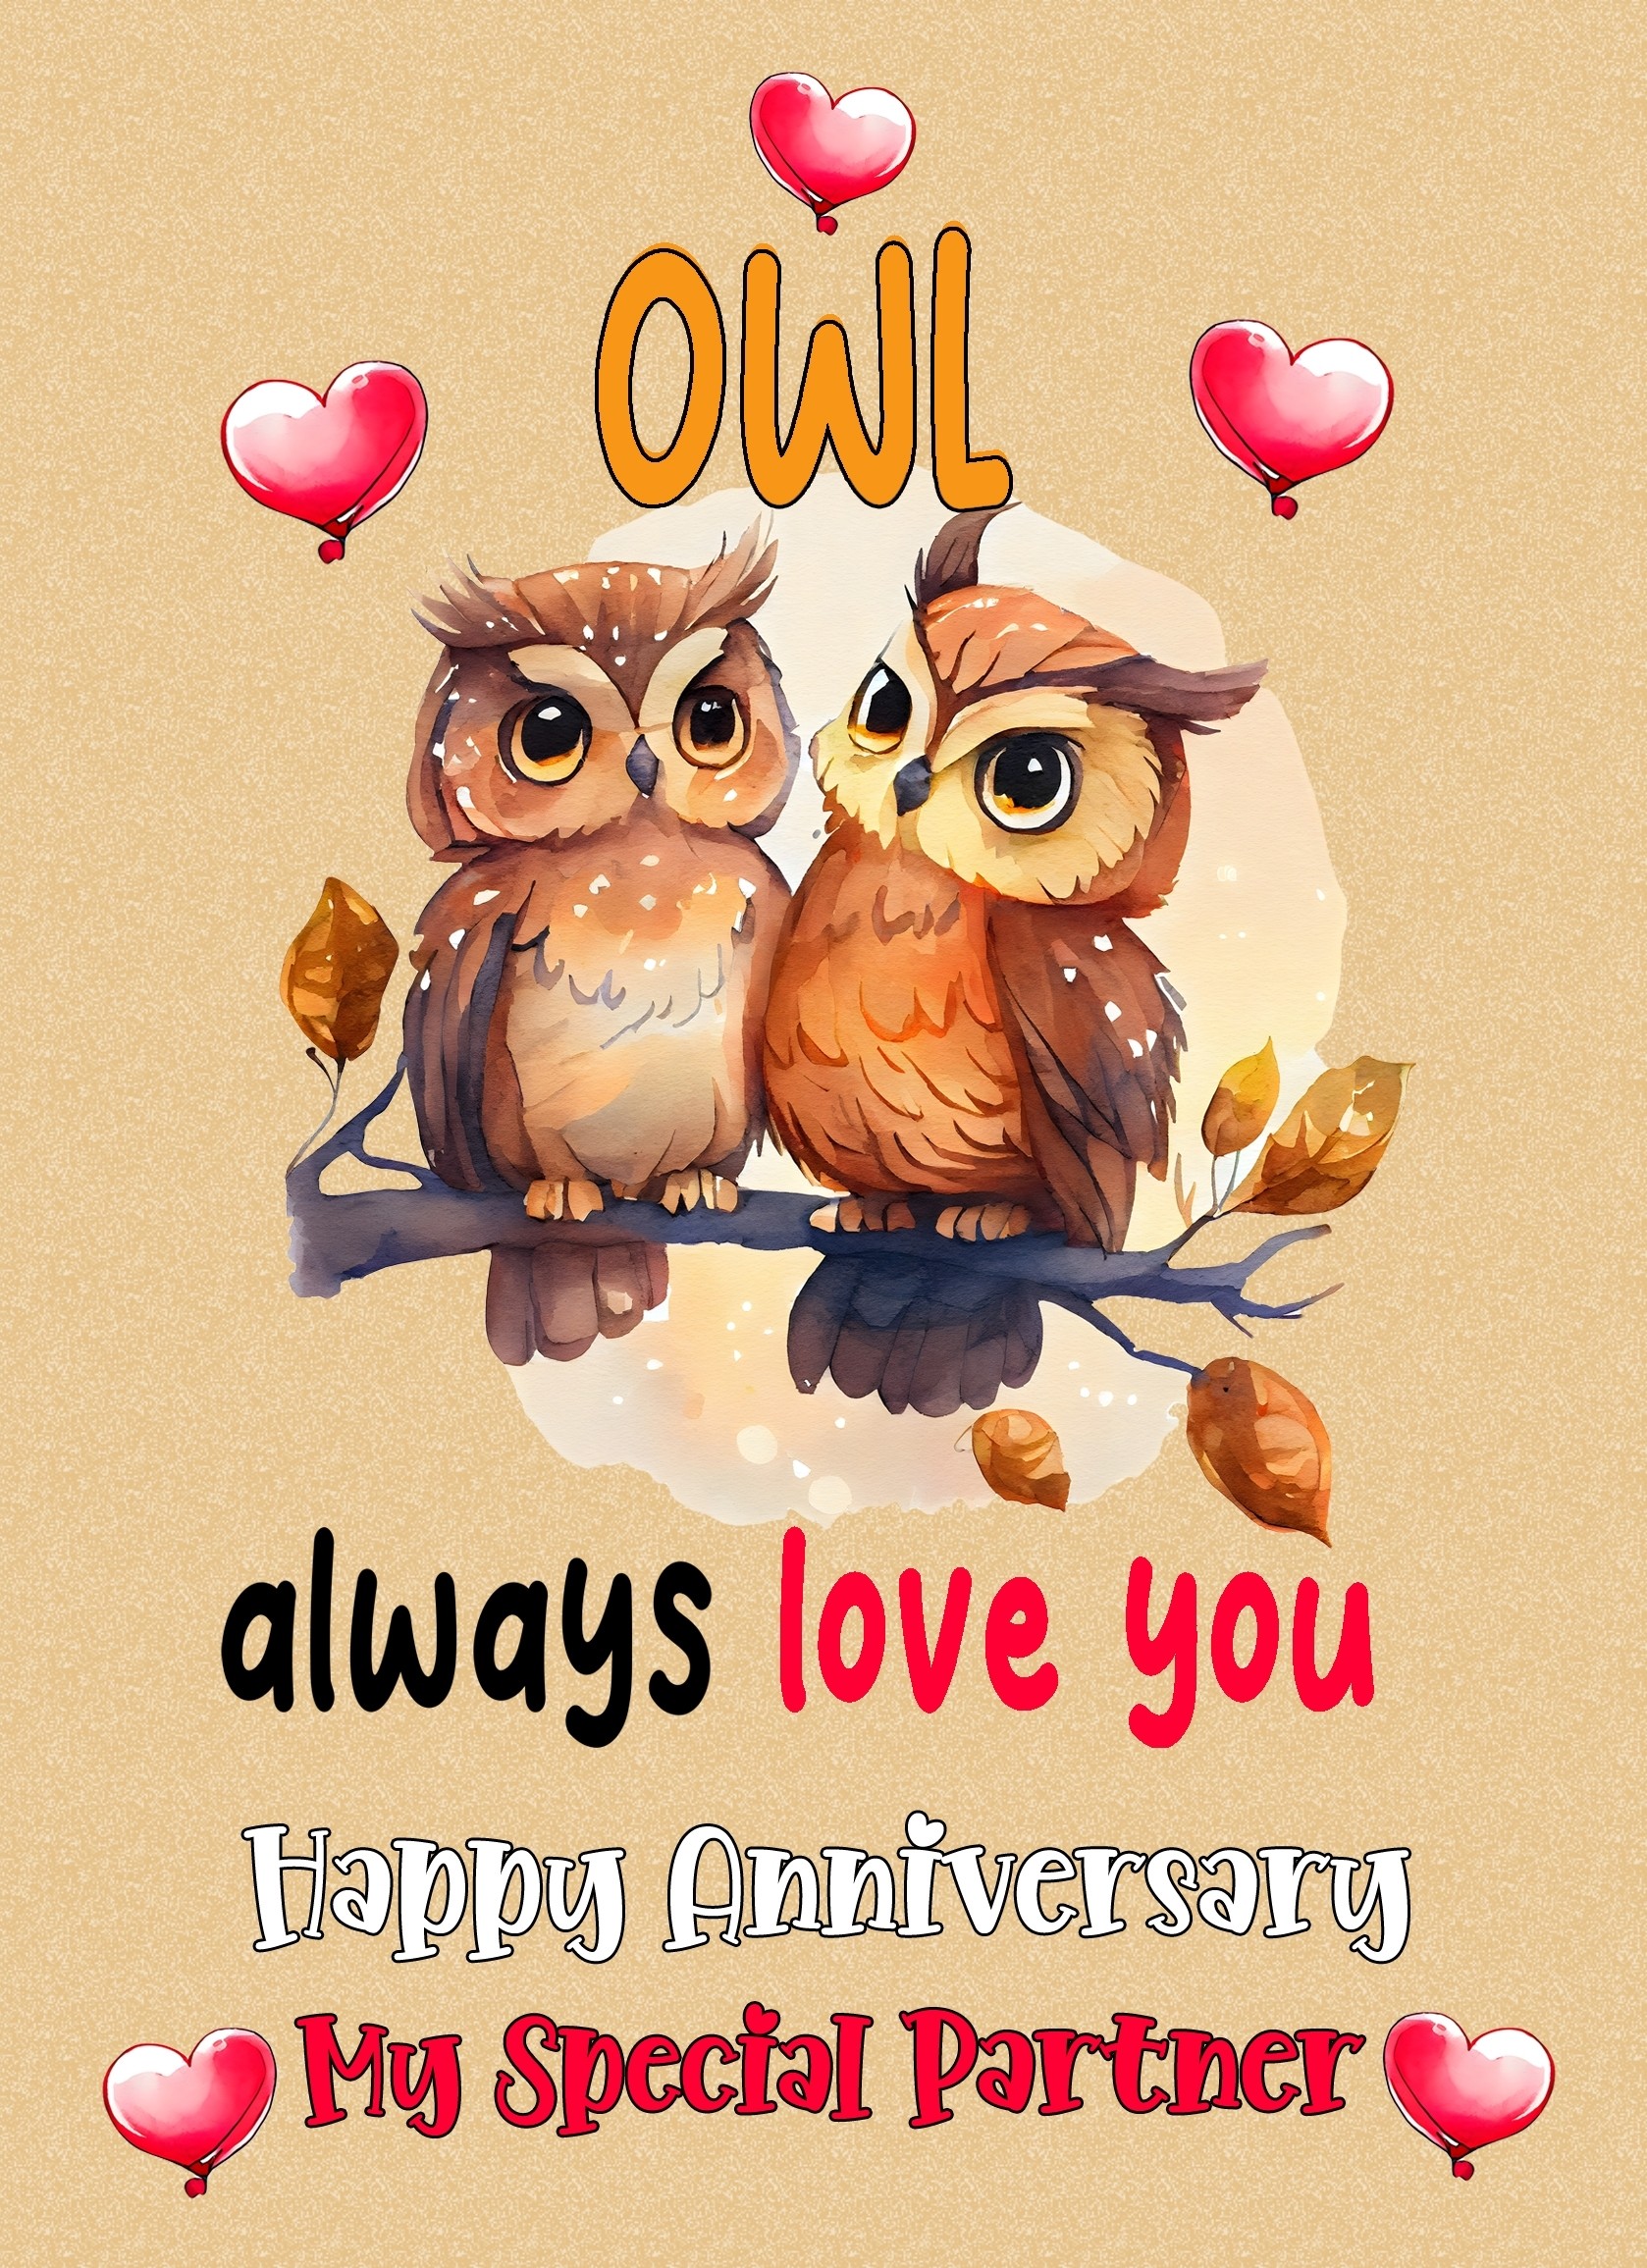 Funny Pun Romantic Anniversary Card for Partner (Owl Always Love You)